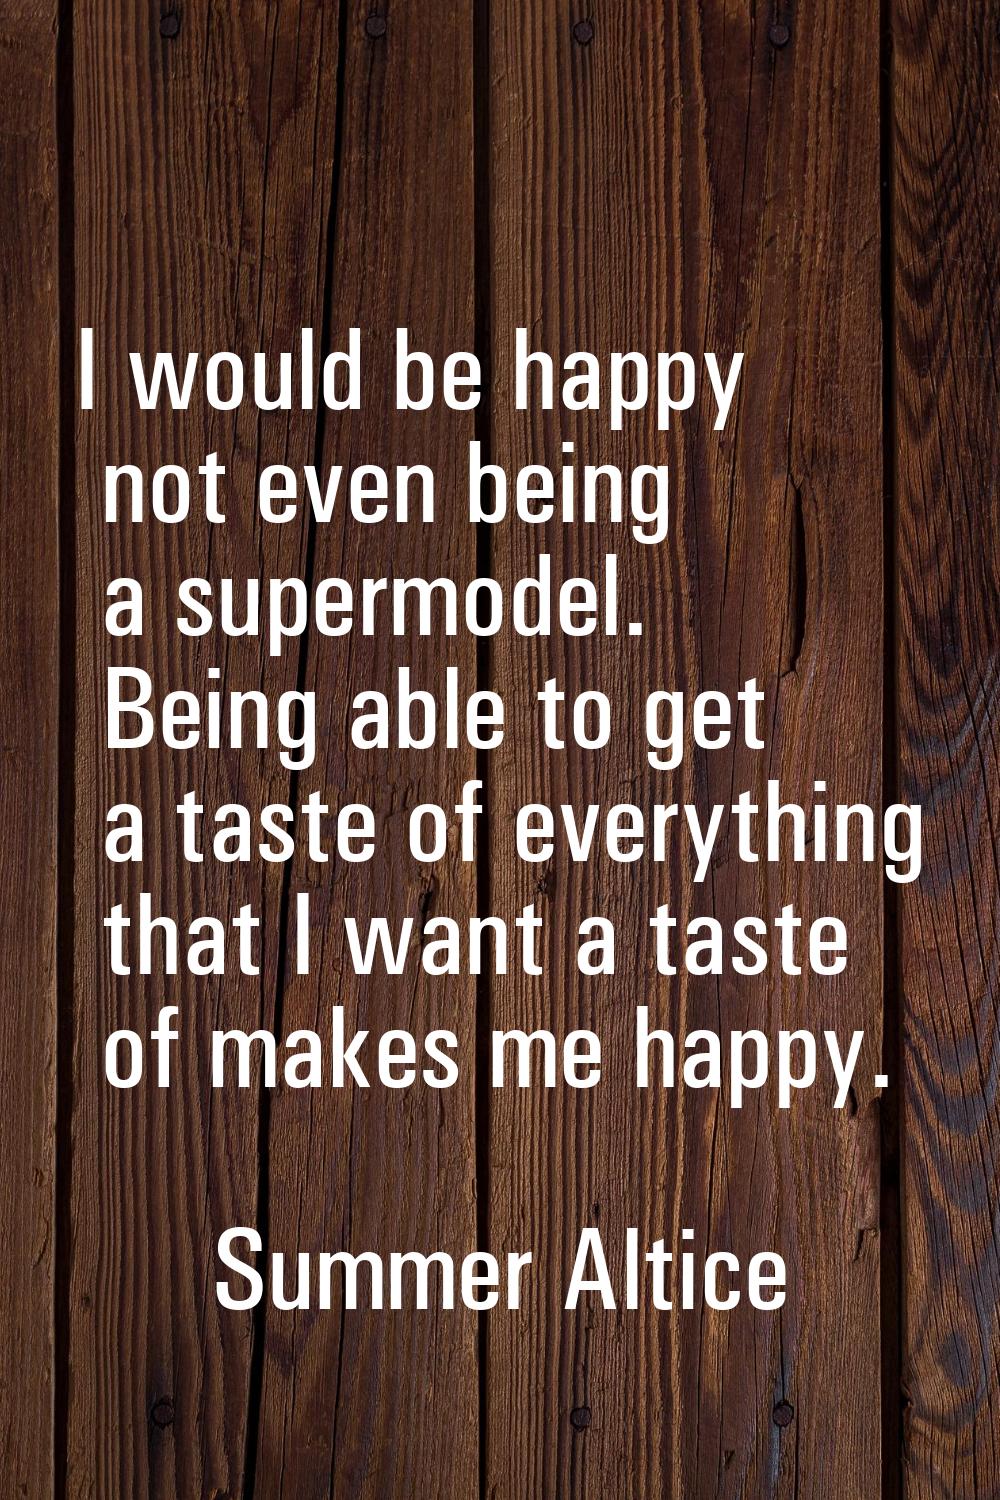 I would be happy not even being a supermodel. Being able to get a taste of everything that I want a